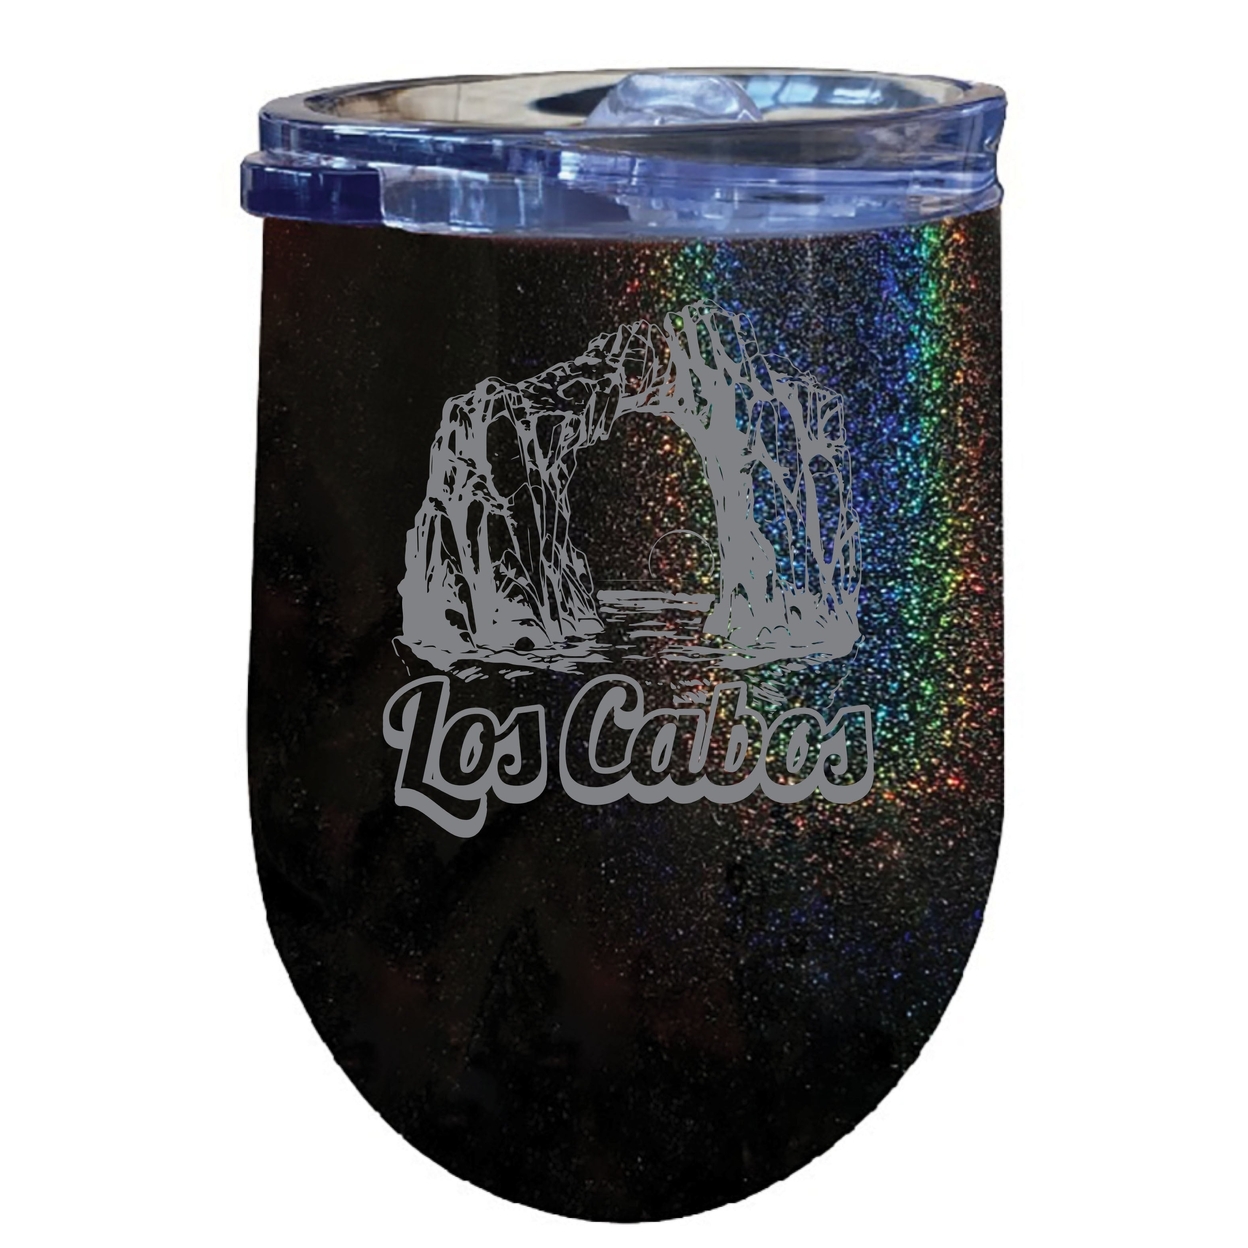 Los Cabos Mexico Souvenir 12 Oz Engraved Insulated Wine Stainless Steel Tumbler - White,,2-Pack